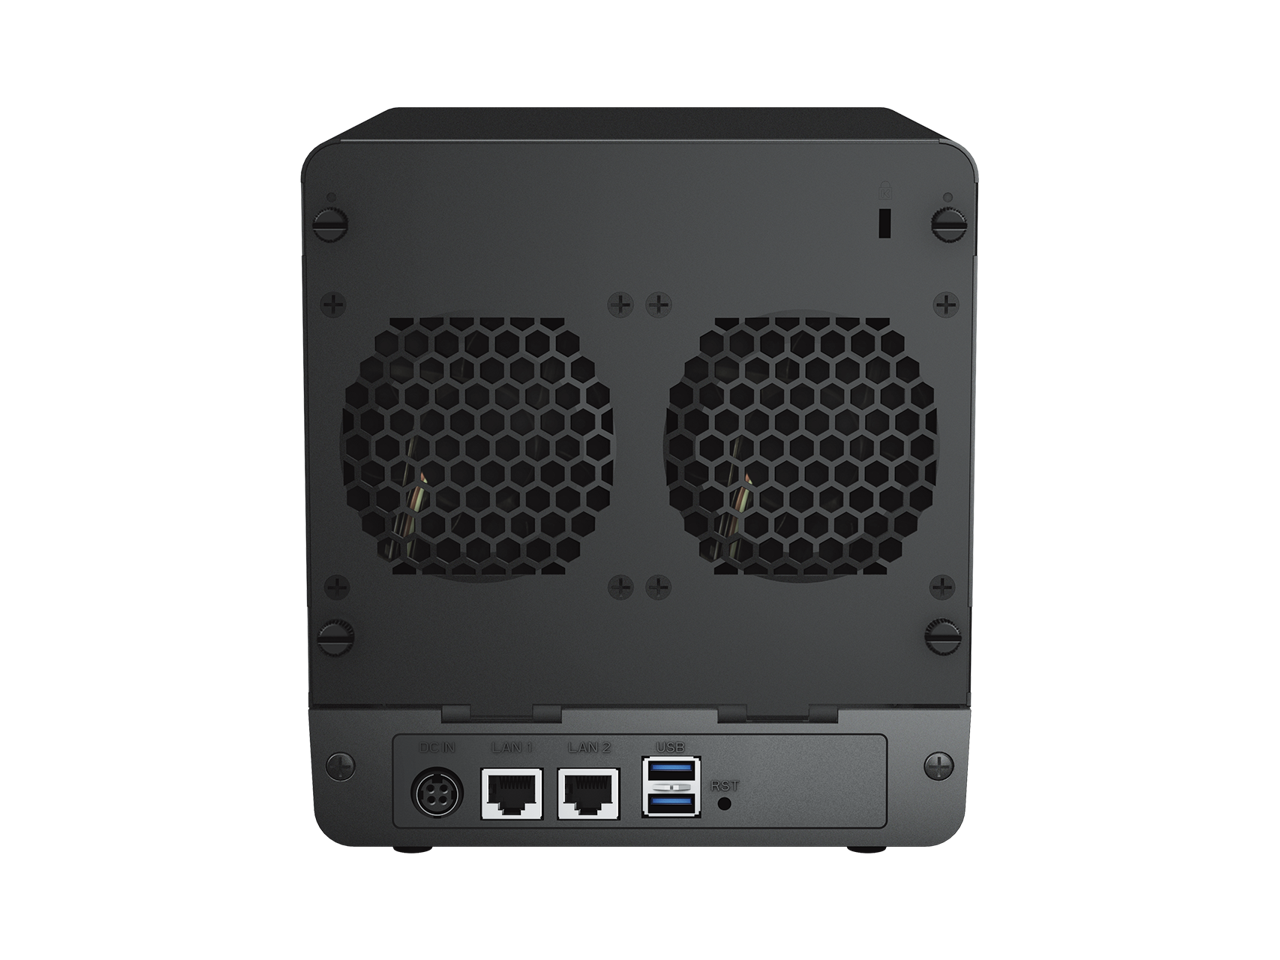 Synology DS423 4-Bay NAS with 2GB RAM and up to 56TB of Western Digital Red Plus Drives Fully Assembled and Tested